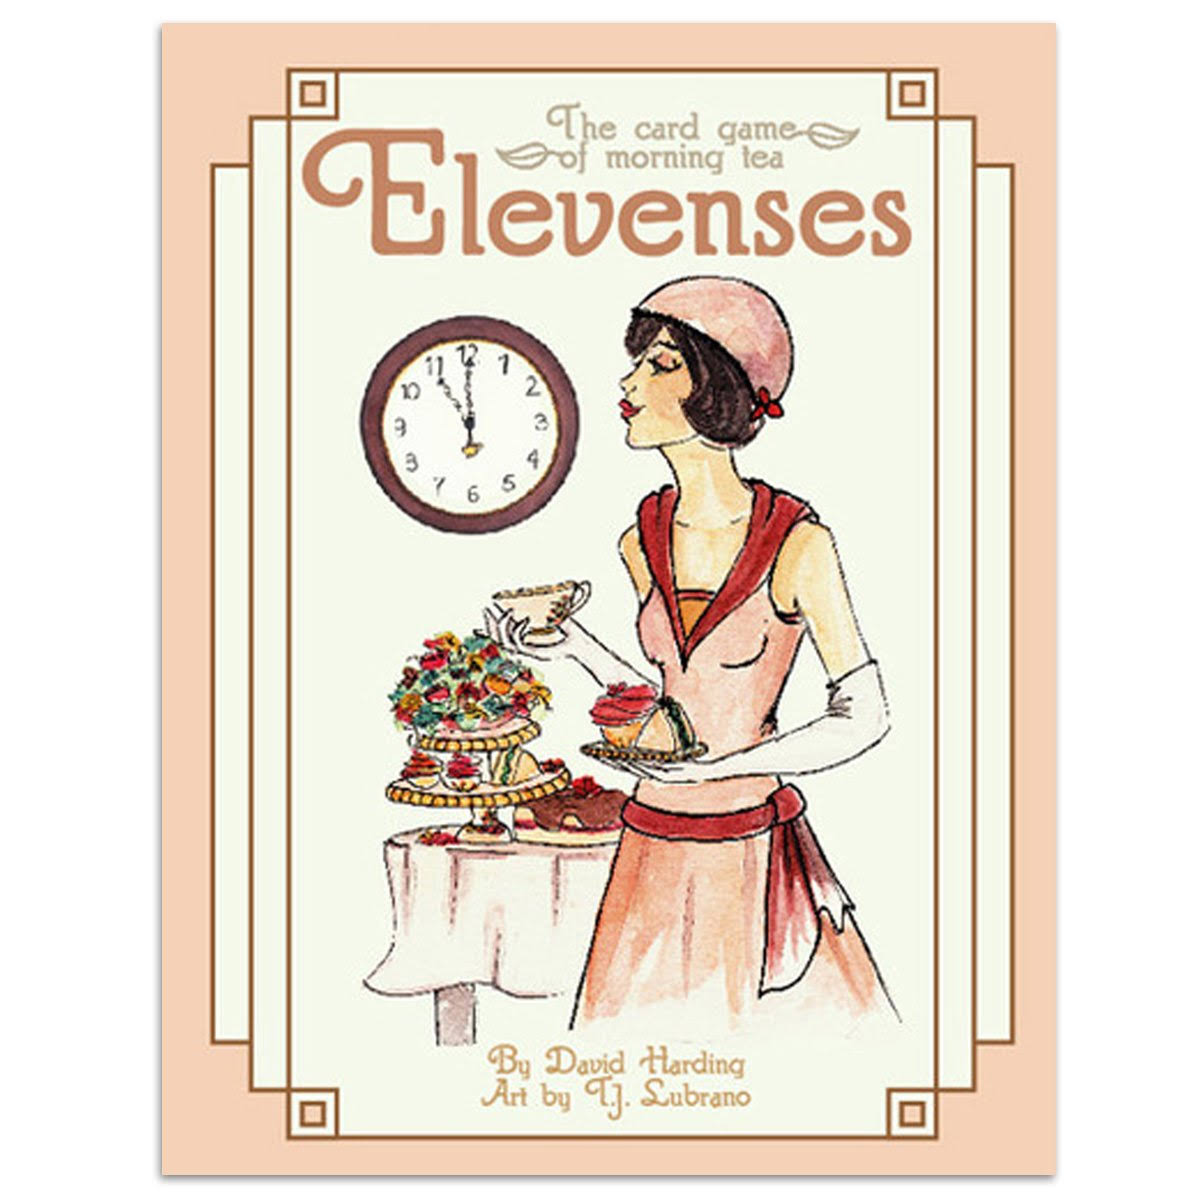 Elevenses: The Morning Tea Card Game